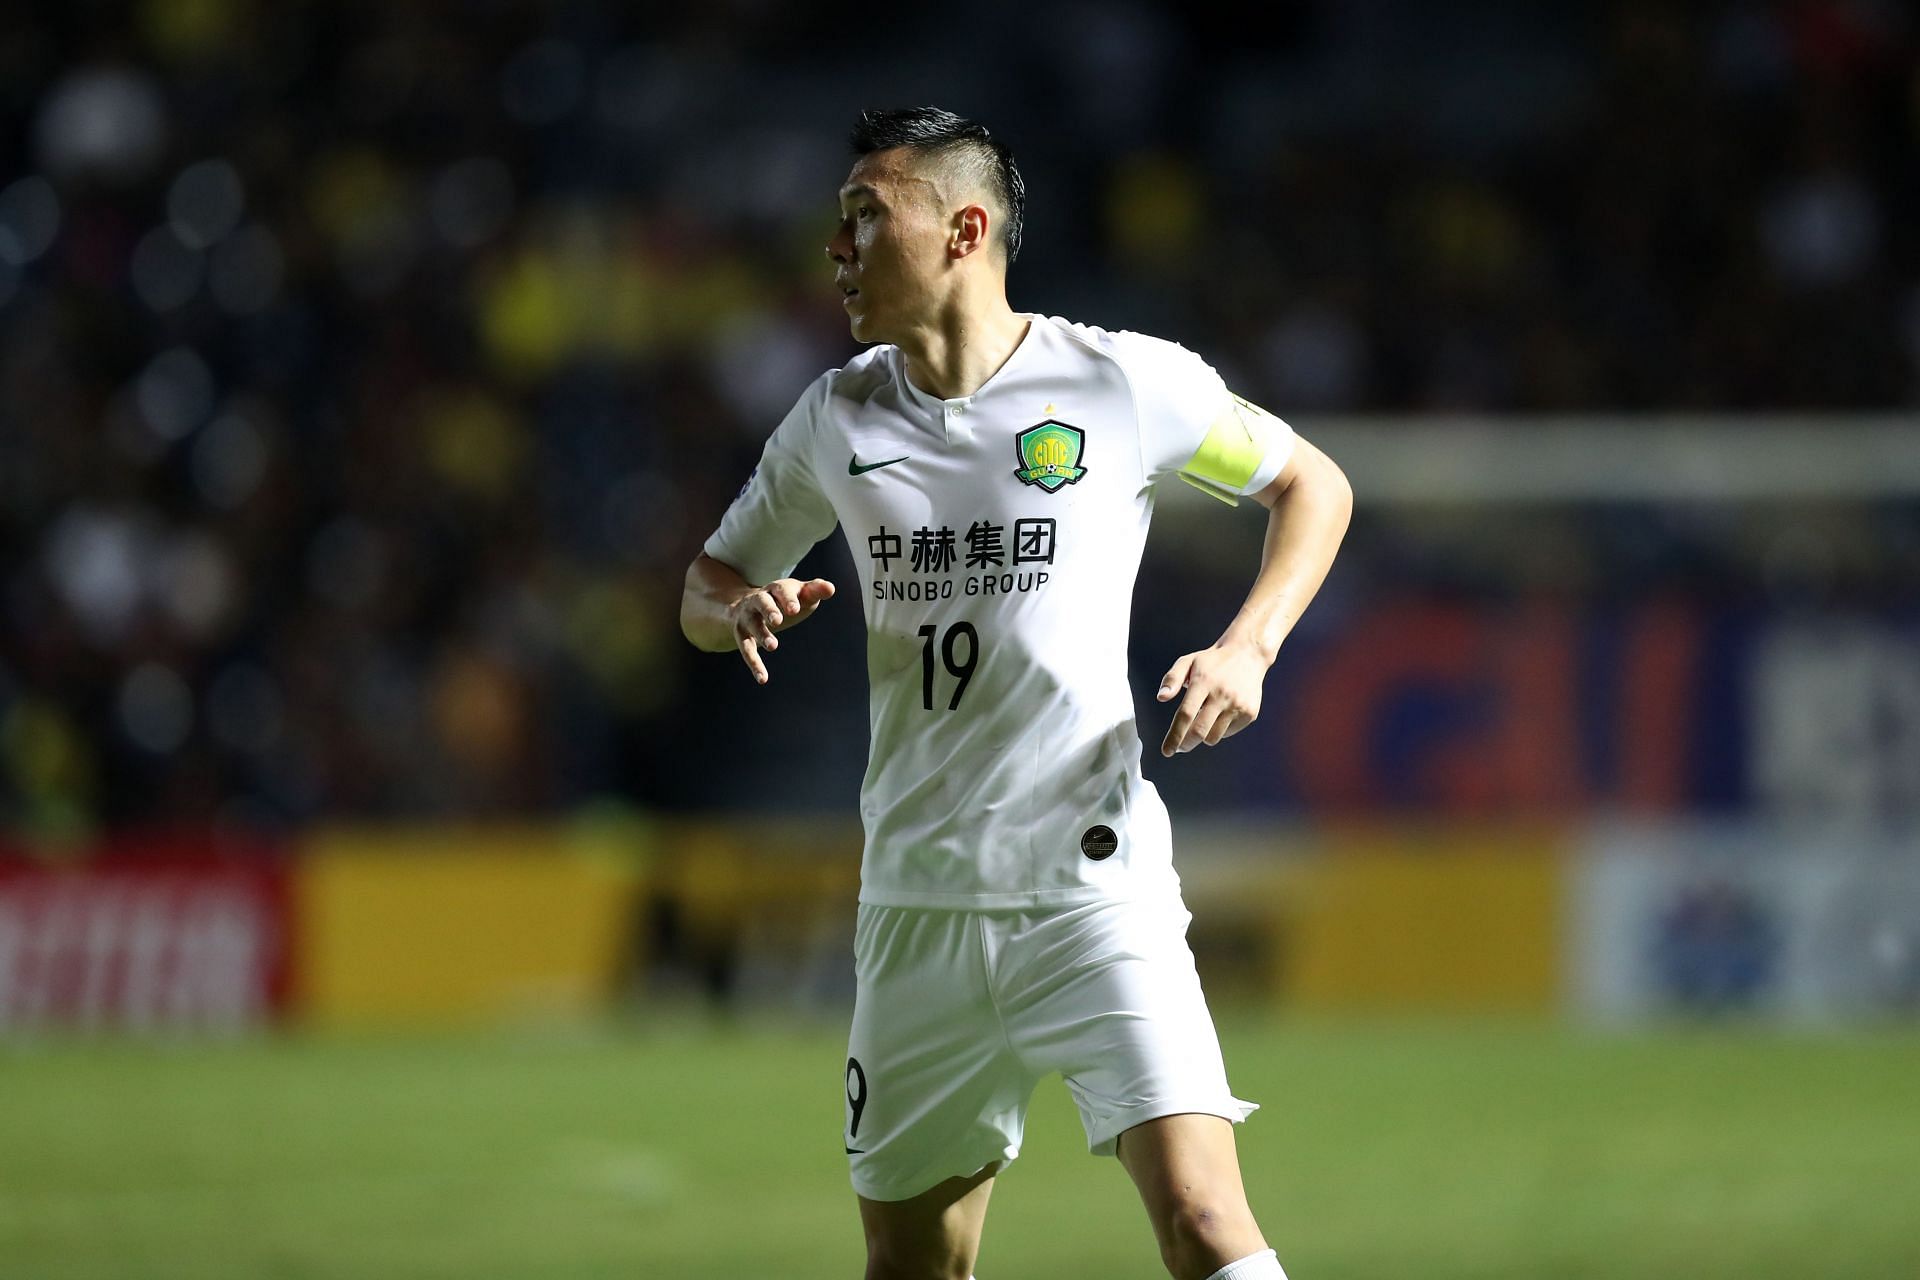 Beijing Guoan will face Shenzhen on Monday - Chinese Super League